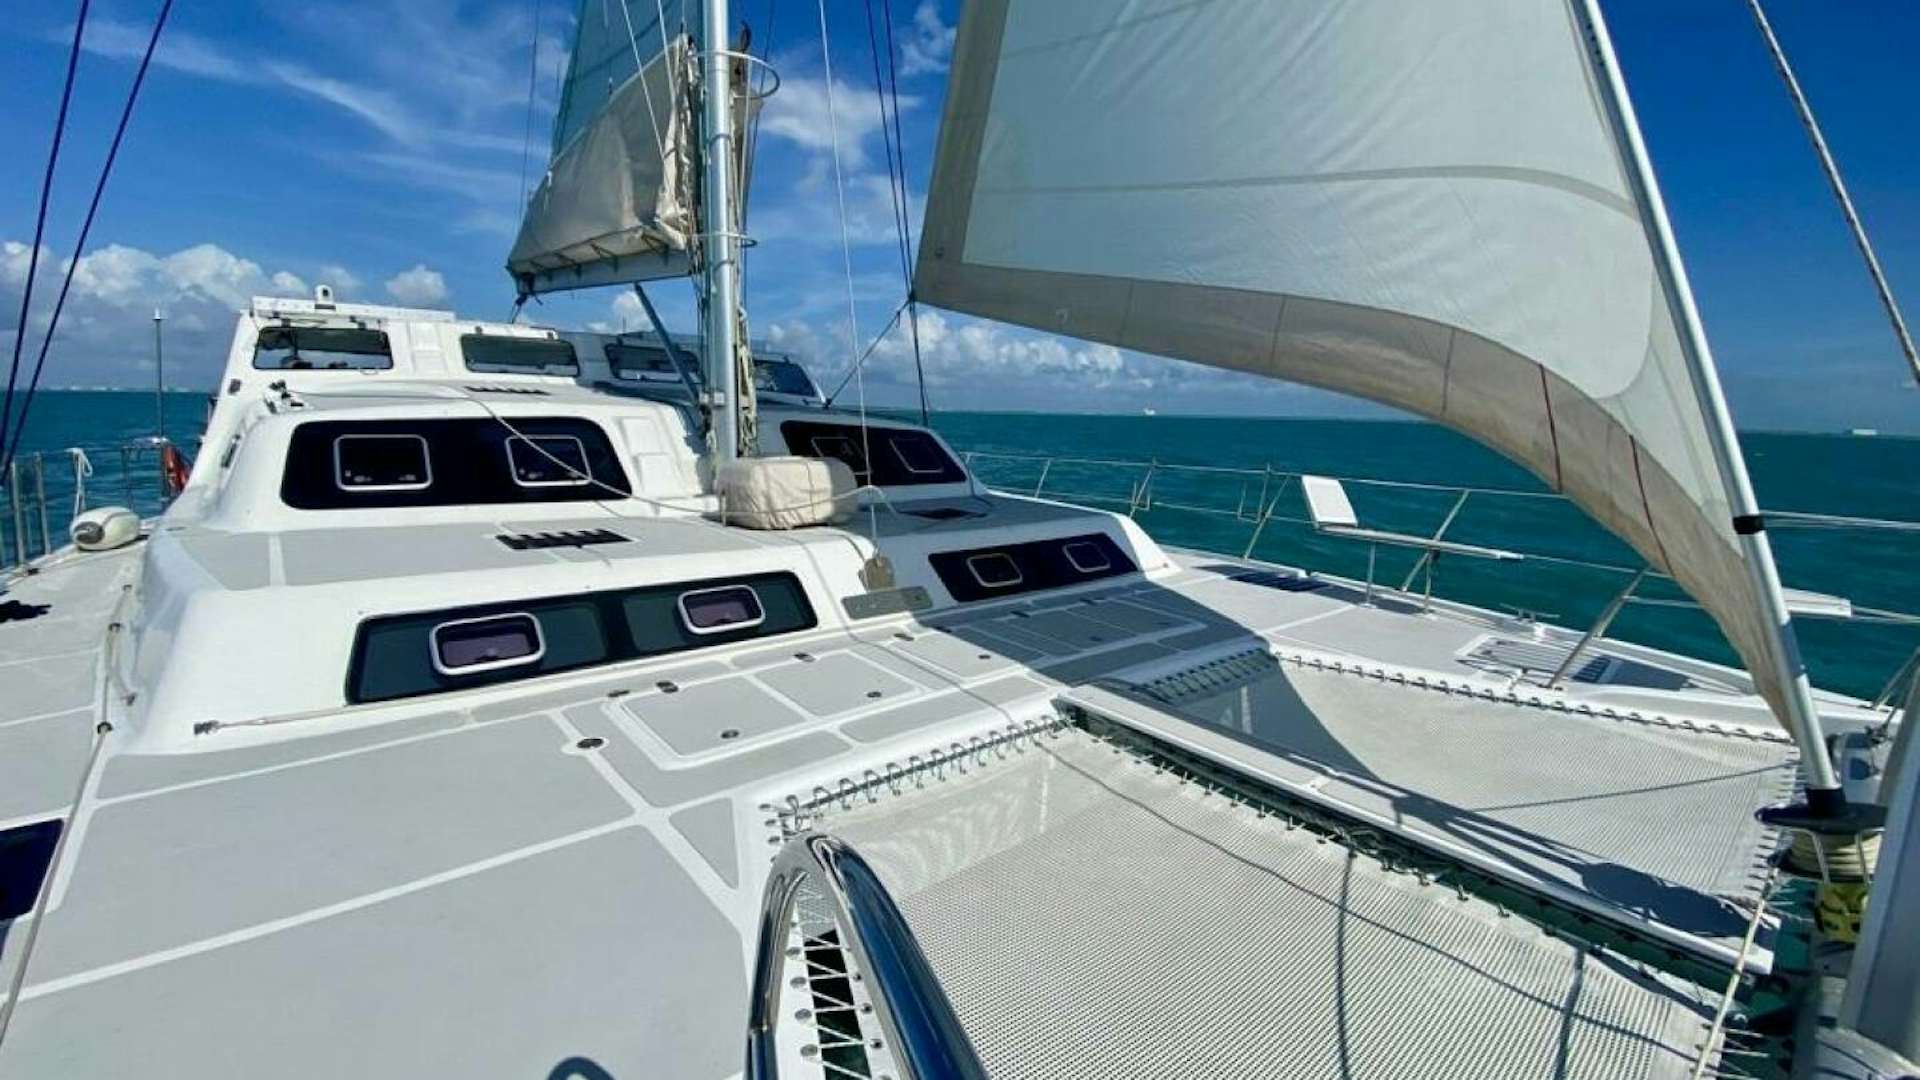 Walk about
Yacht for Sale